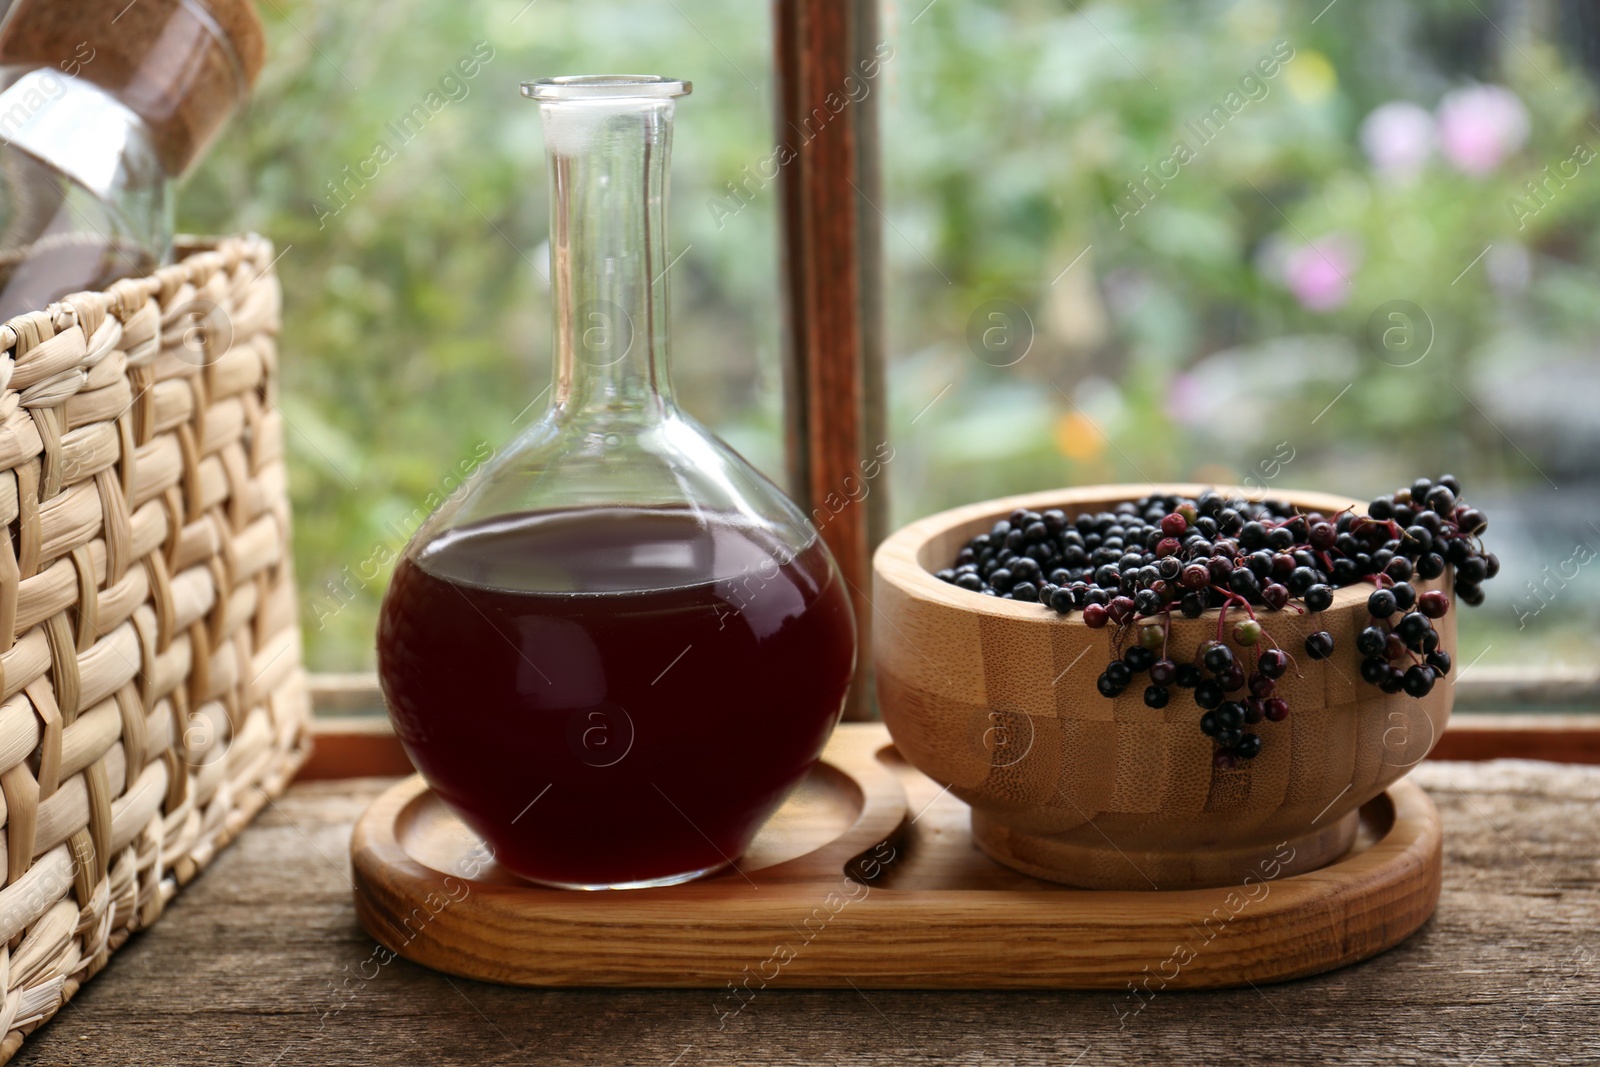 Photo of Elderberry wine and bowl with Sambucus berries on wooden table near window